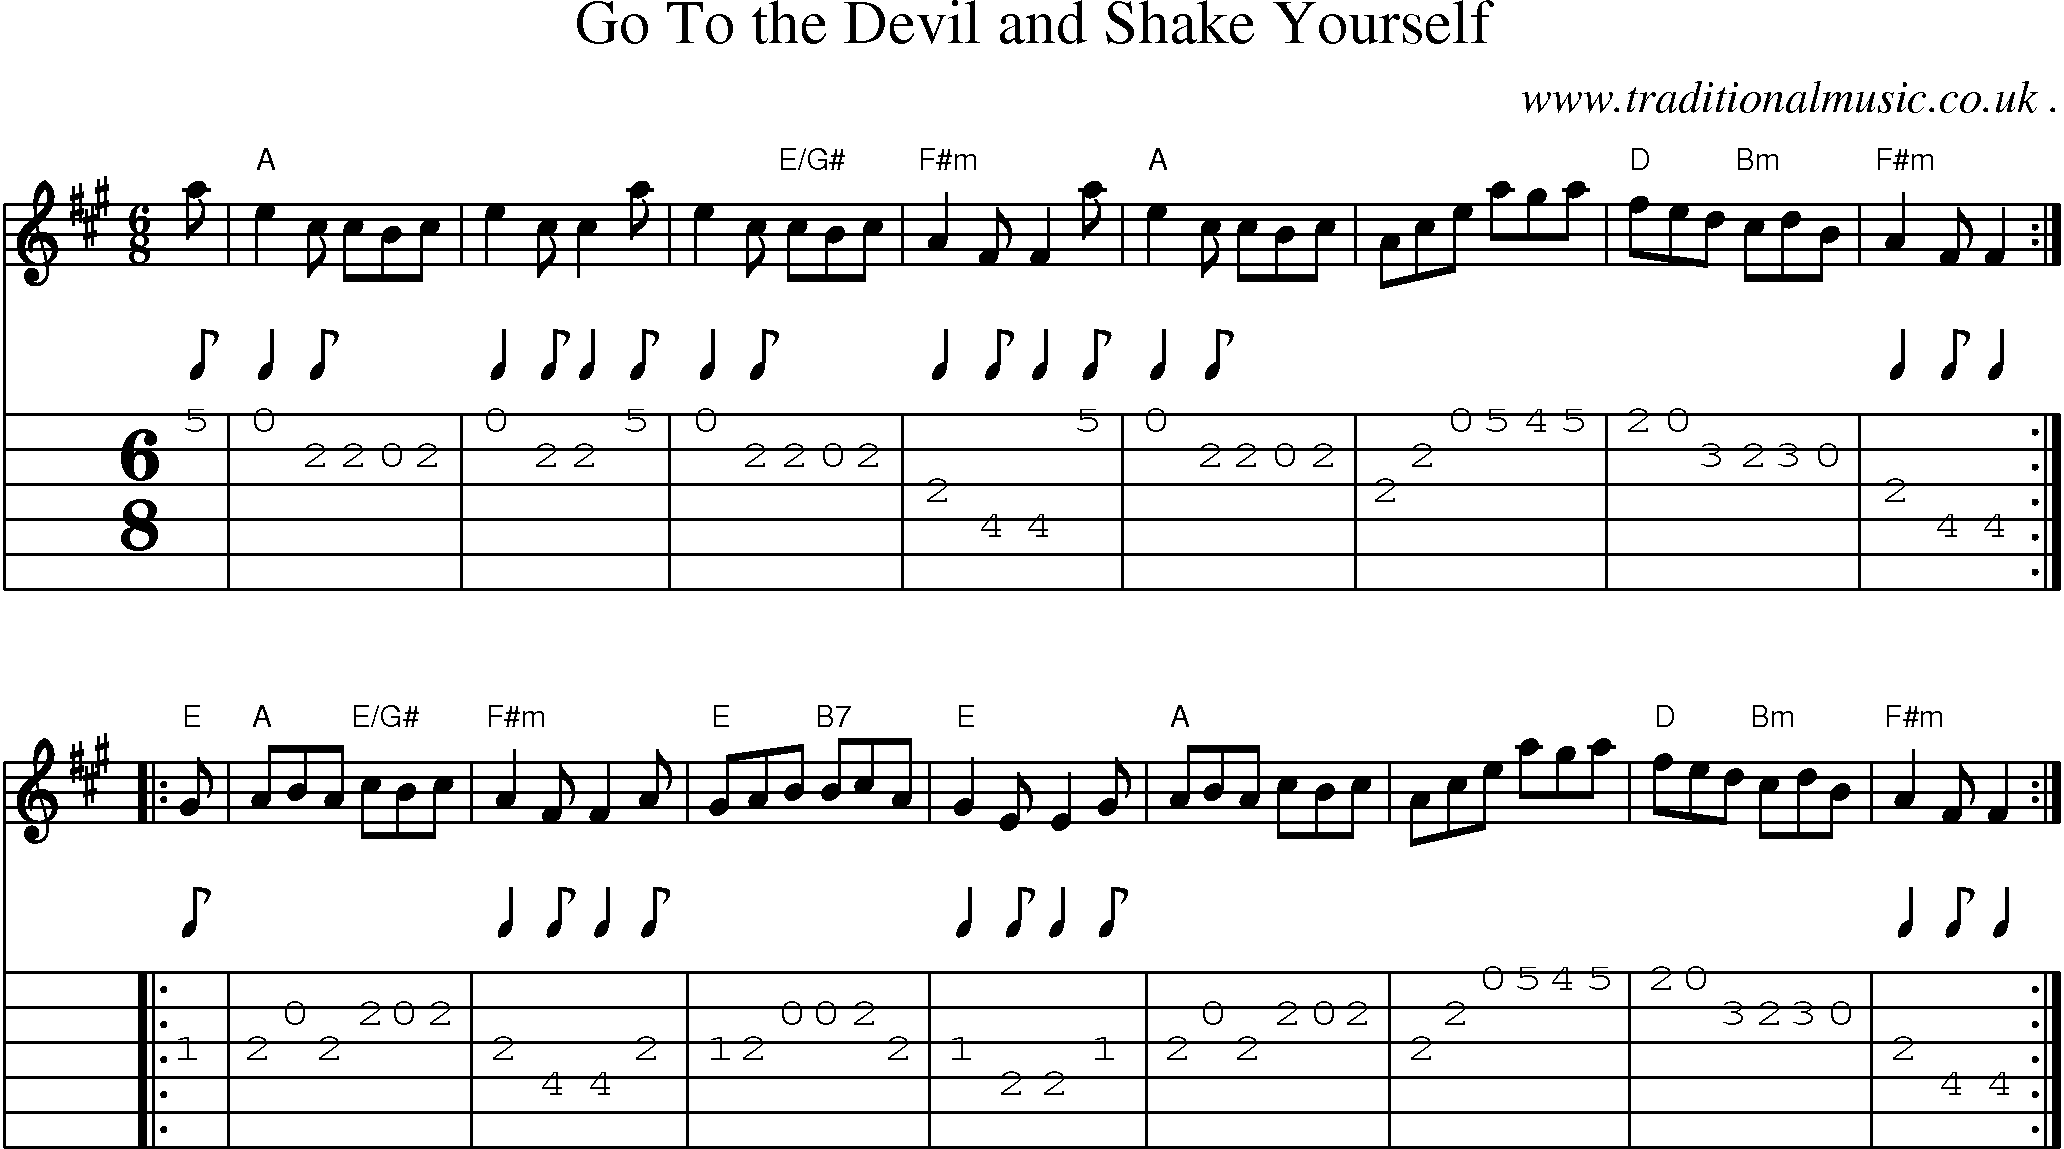 Sheet-music  score, Chords and Guitar Tabs for Go To The Devil And Shake Yourself